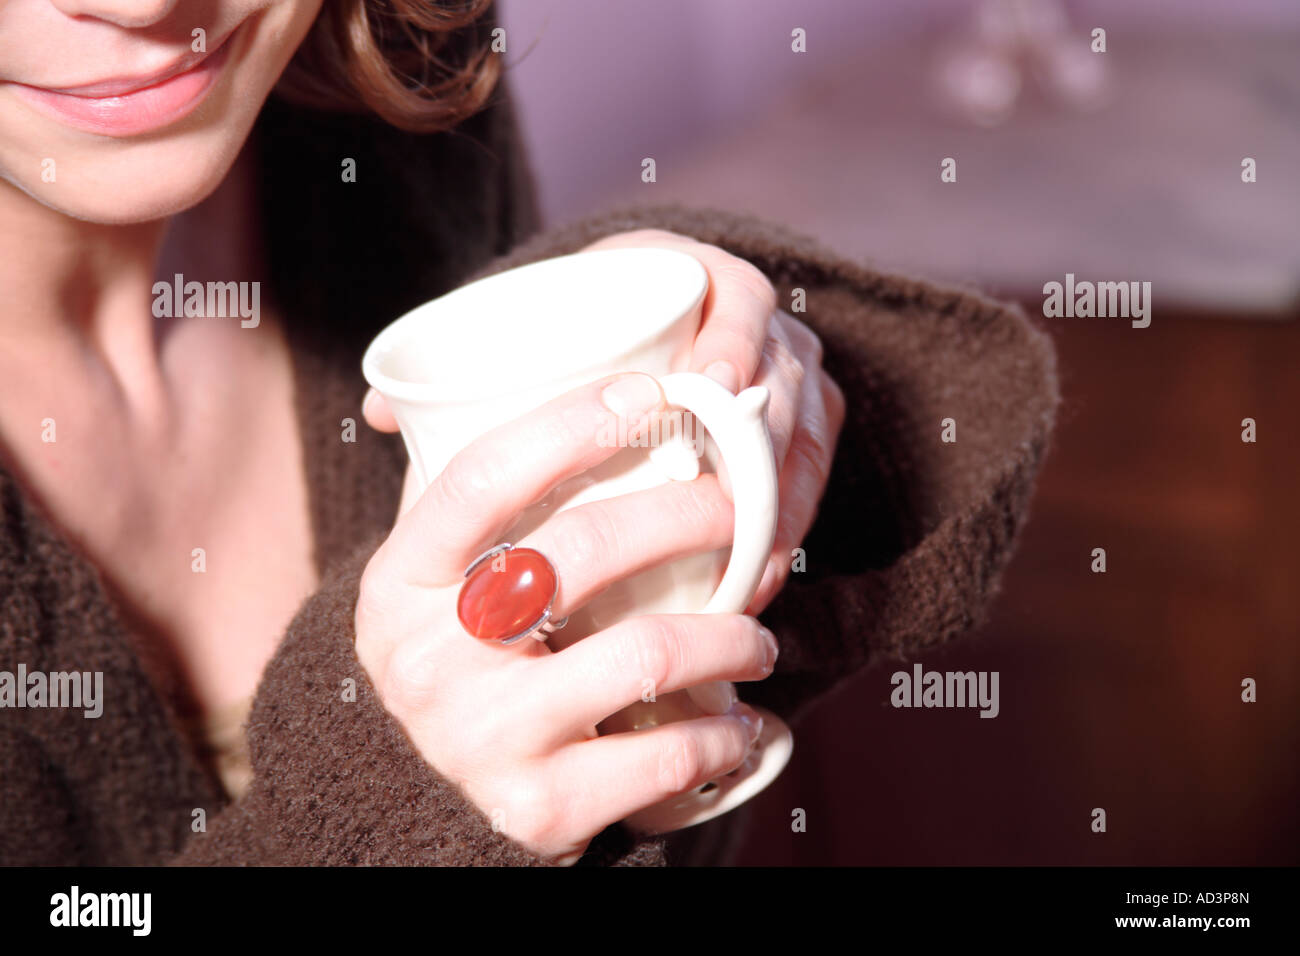 Young woman holding cup of tea, close up Stock Photo